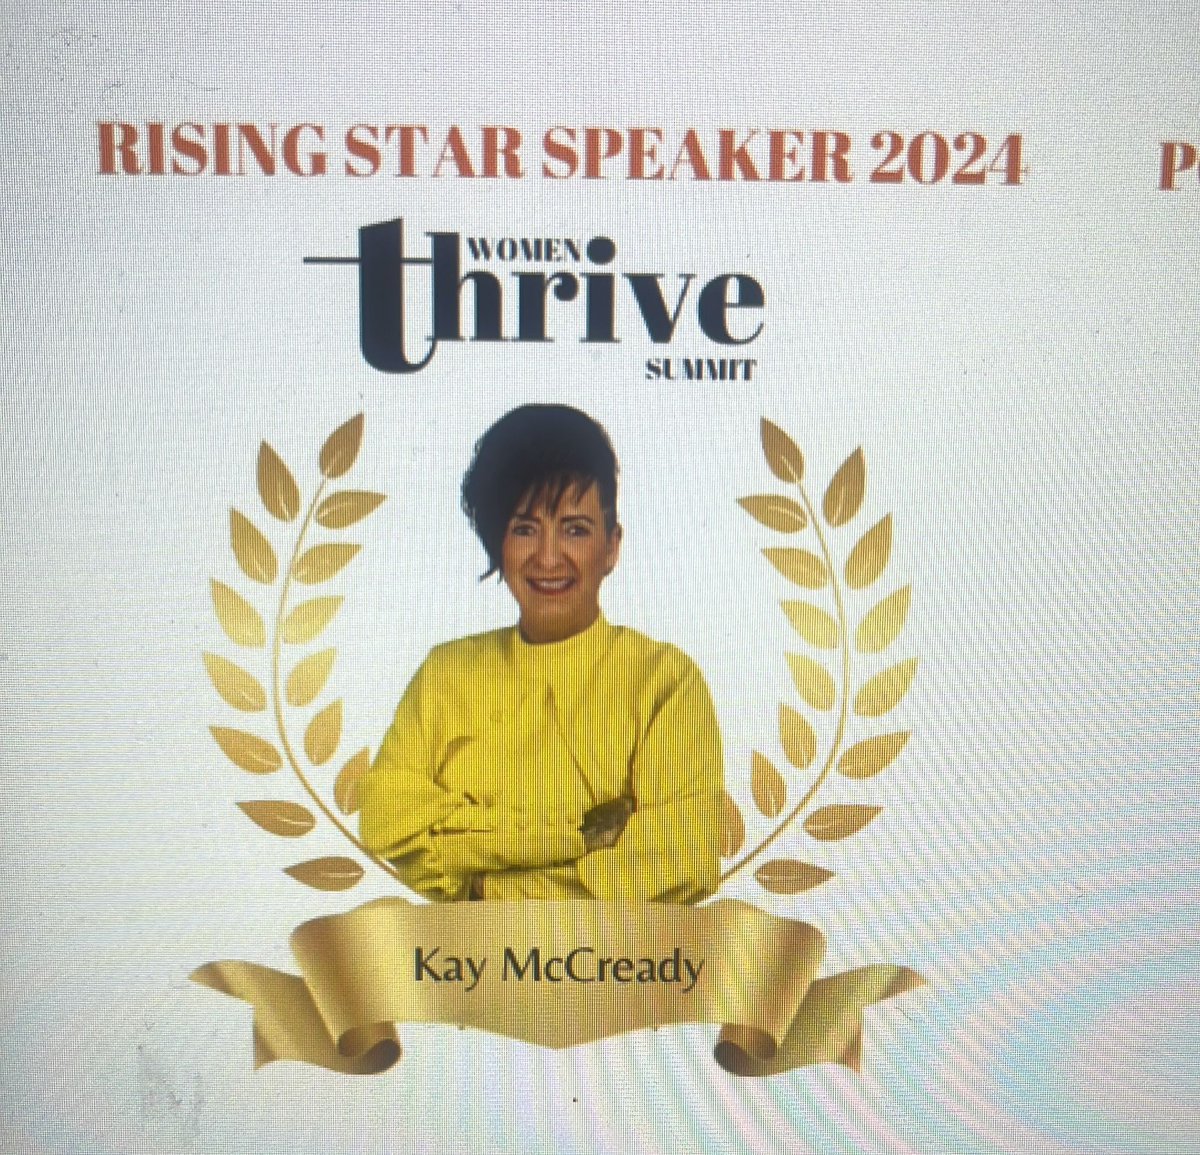 I have just heard tonight that Kay won  Best Rising Star Speaker 2024. Huge congratulations and I look forward to her presentation @tpc2024.  Have you reserved your ticket yet? ncl.ac.uk/research/techn… @NU_Technet @TechsCommit @NU_Women @uk_itss